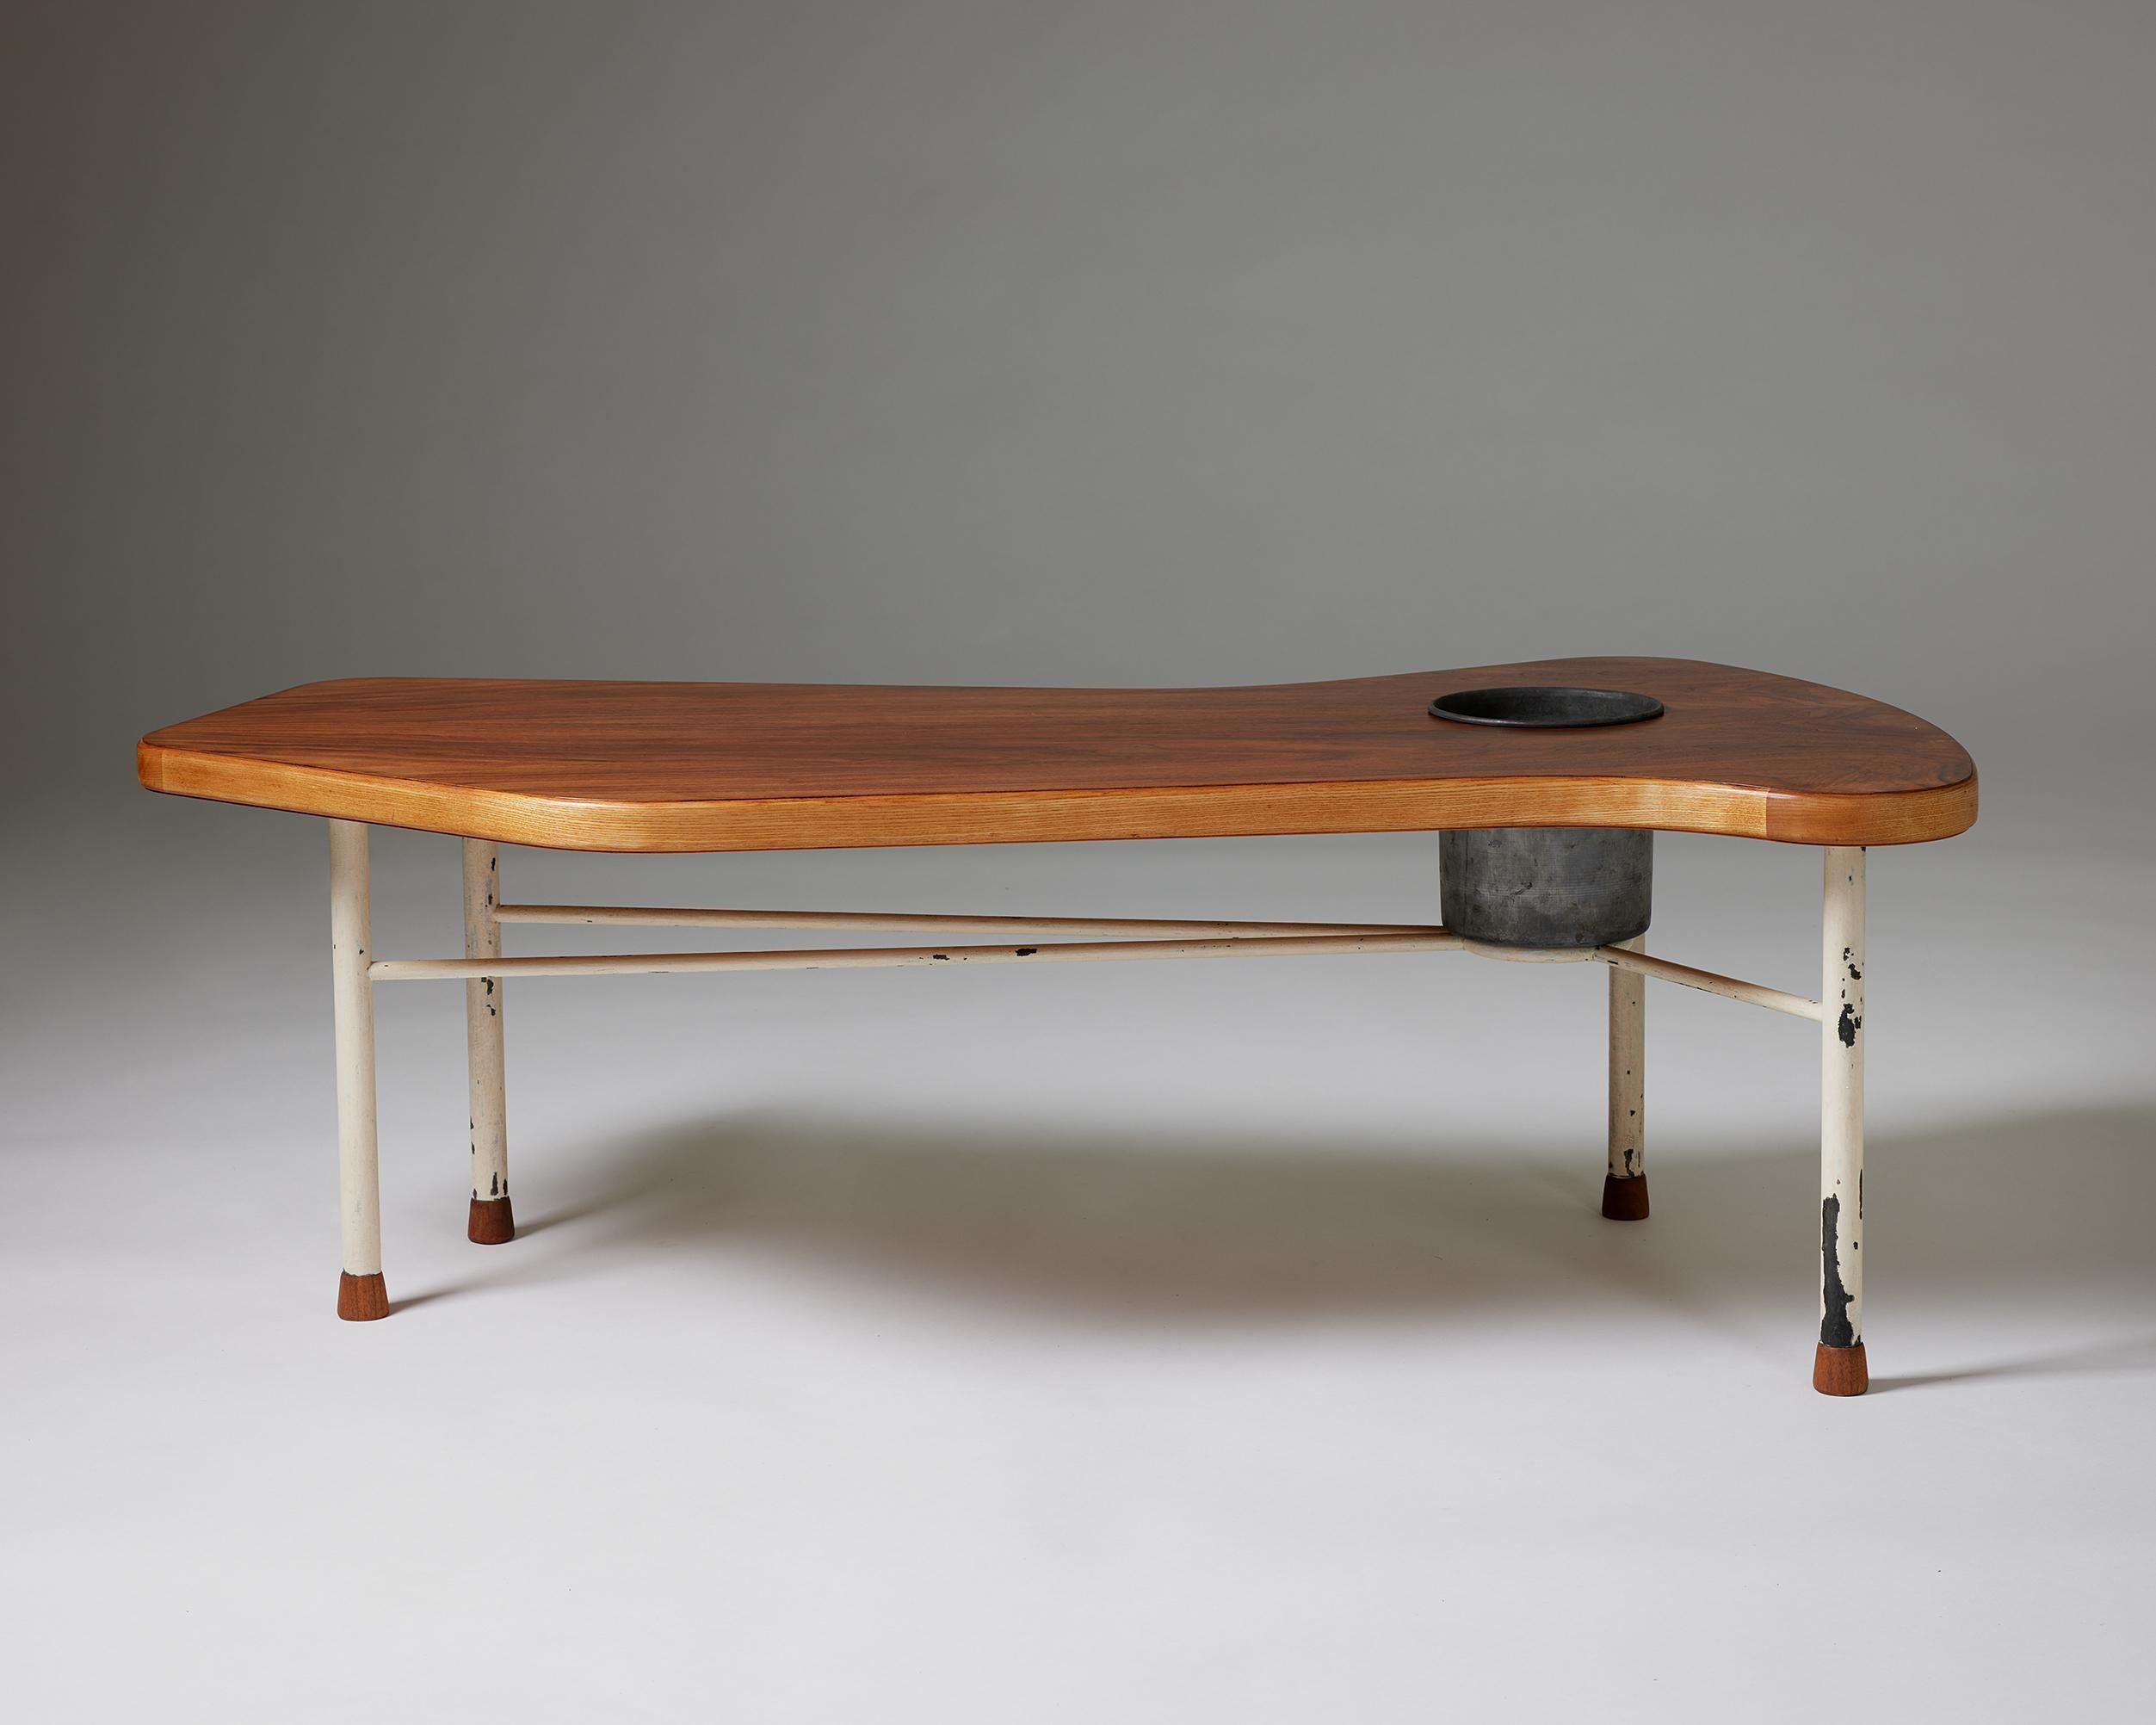 Rare Coffee Table Designed by Finn Juhl for Niels Vodder, Denmark, 1941 In Good Condition For Sale In Stockholm, SE